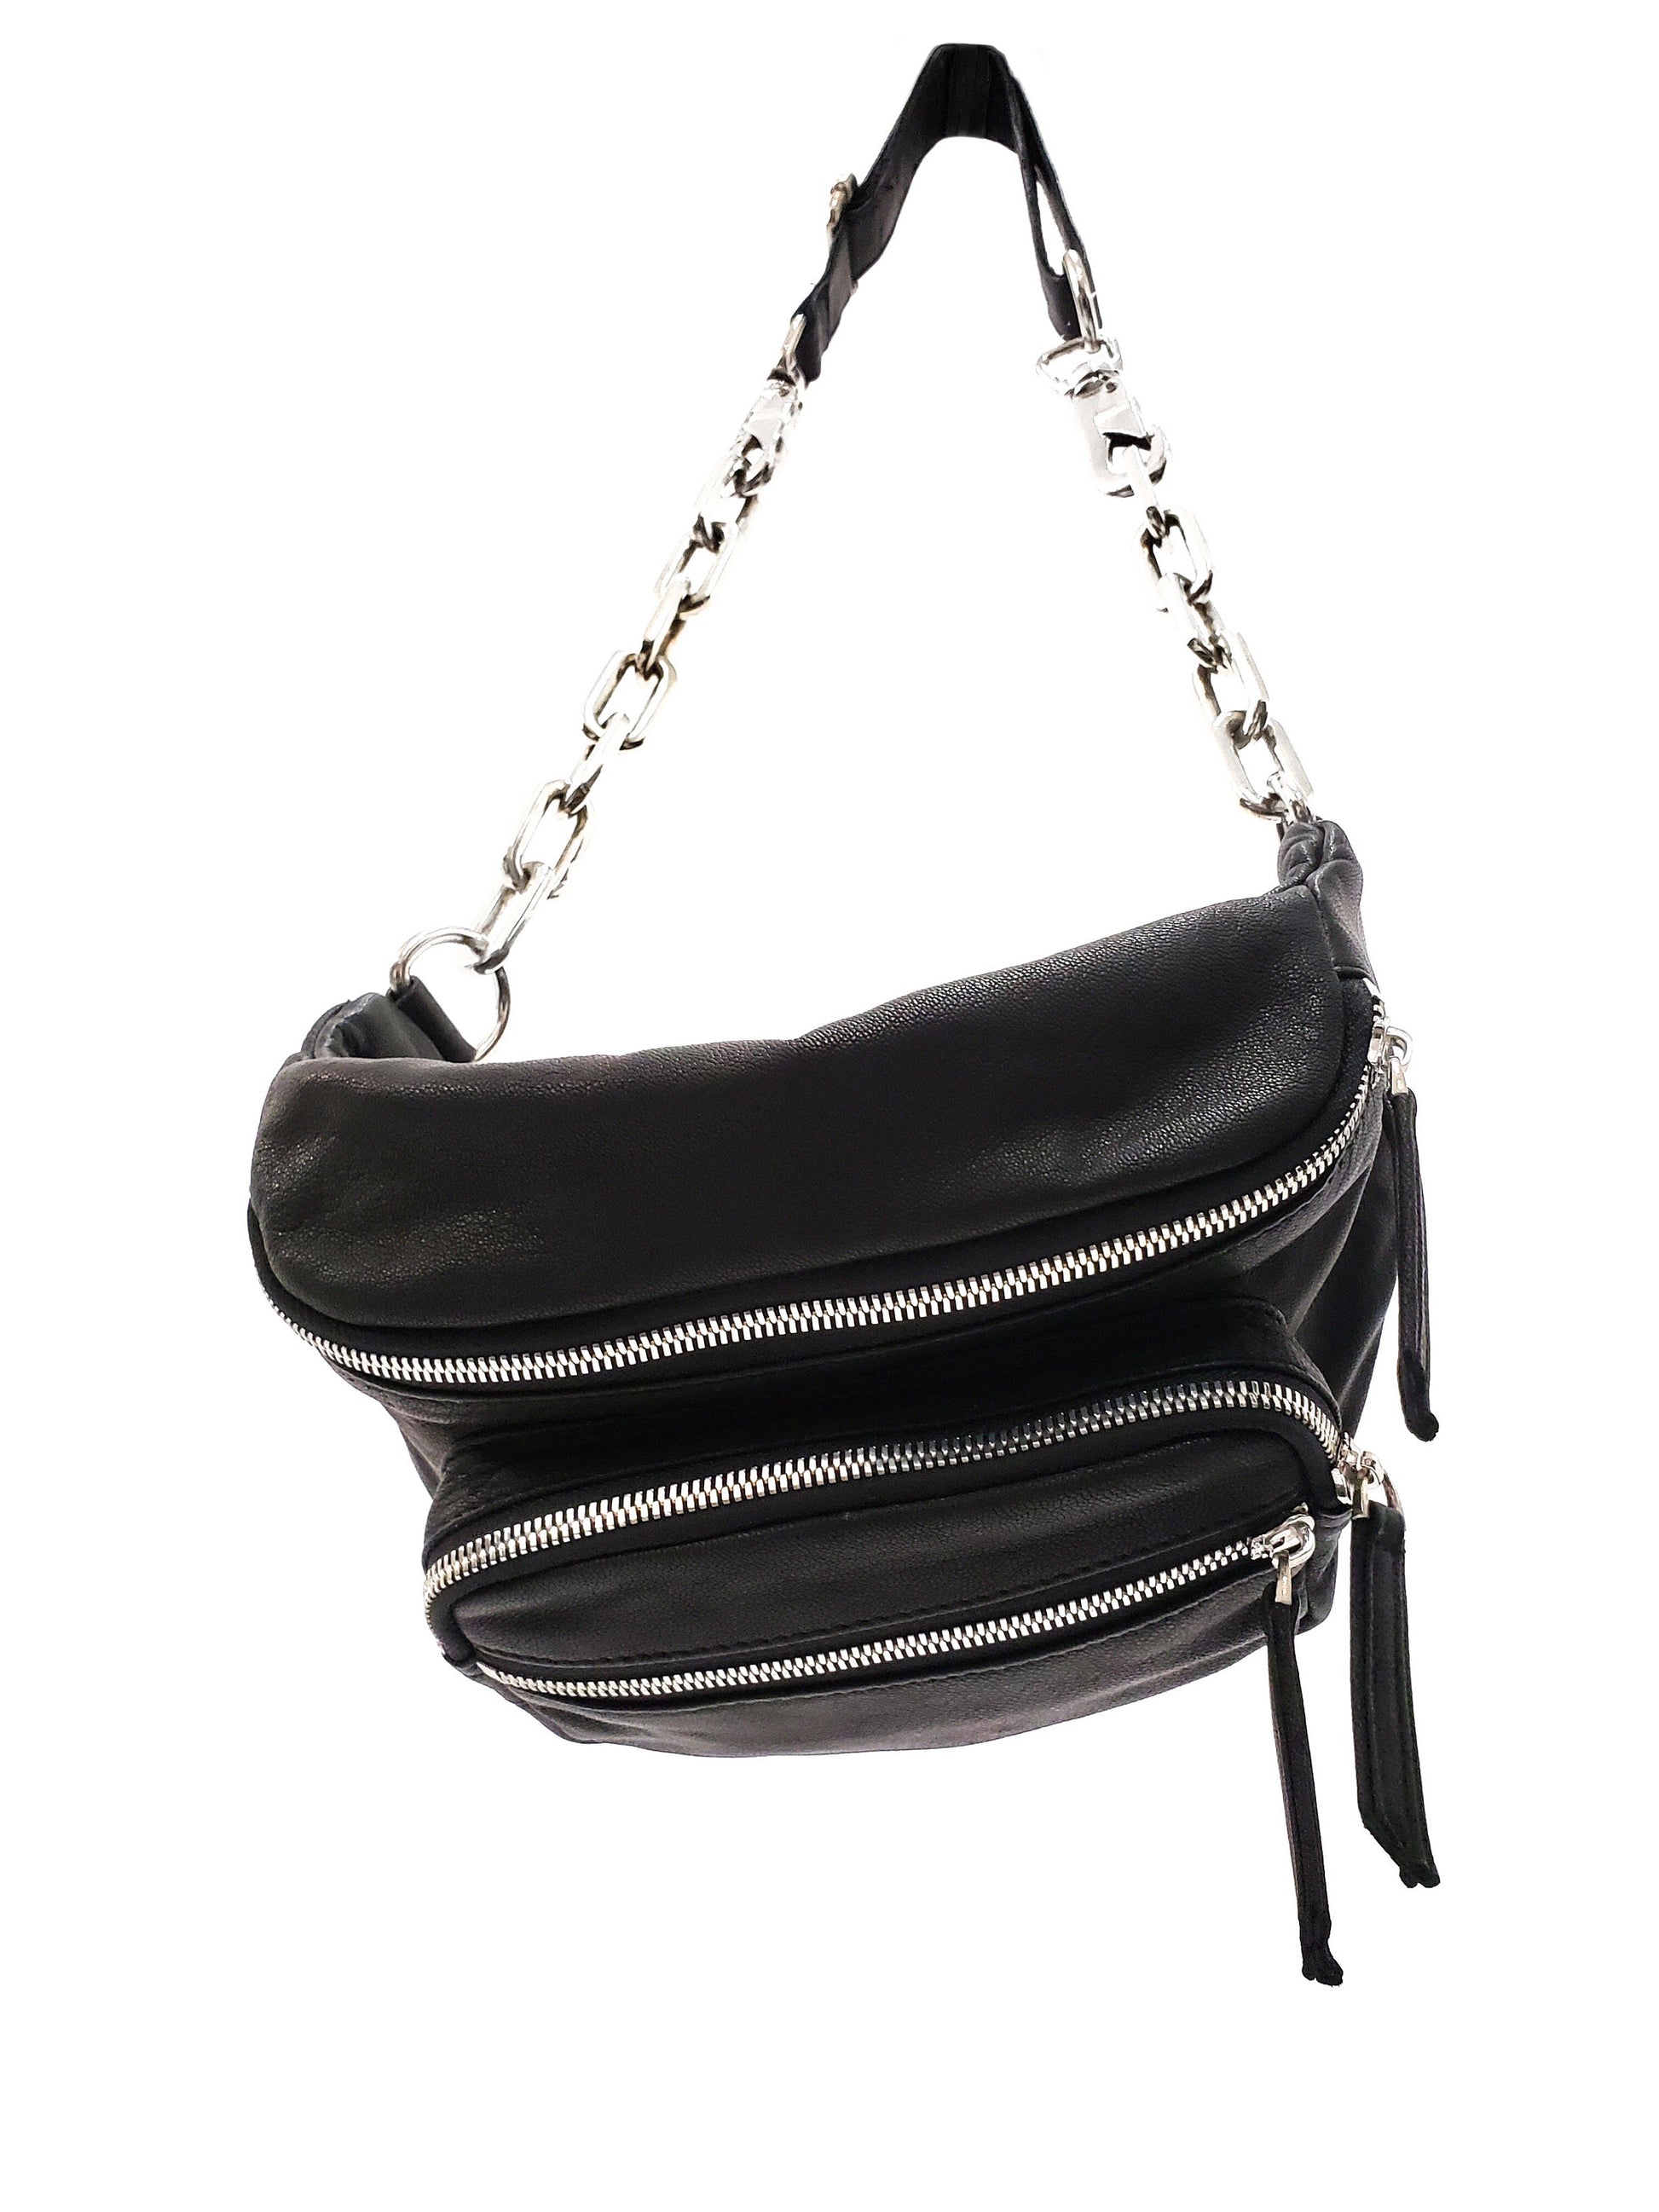 Silver Chain Reaction Fanny Pack Crossbody Sling Bag Black -  Canada